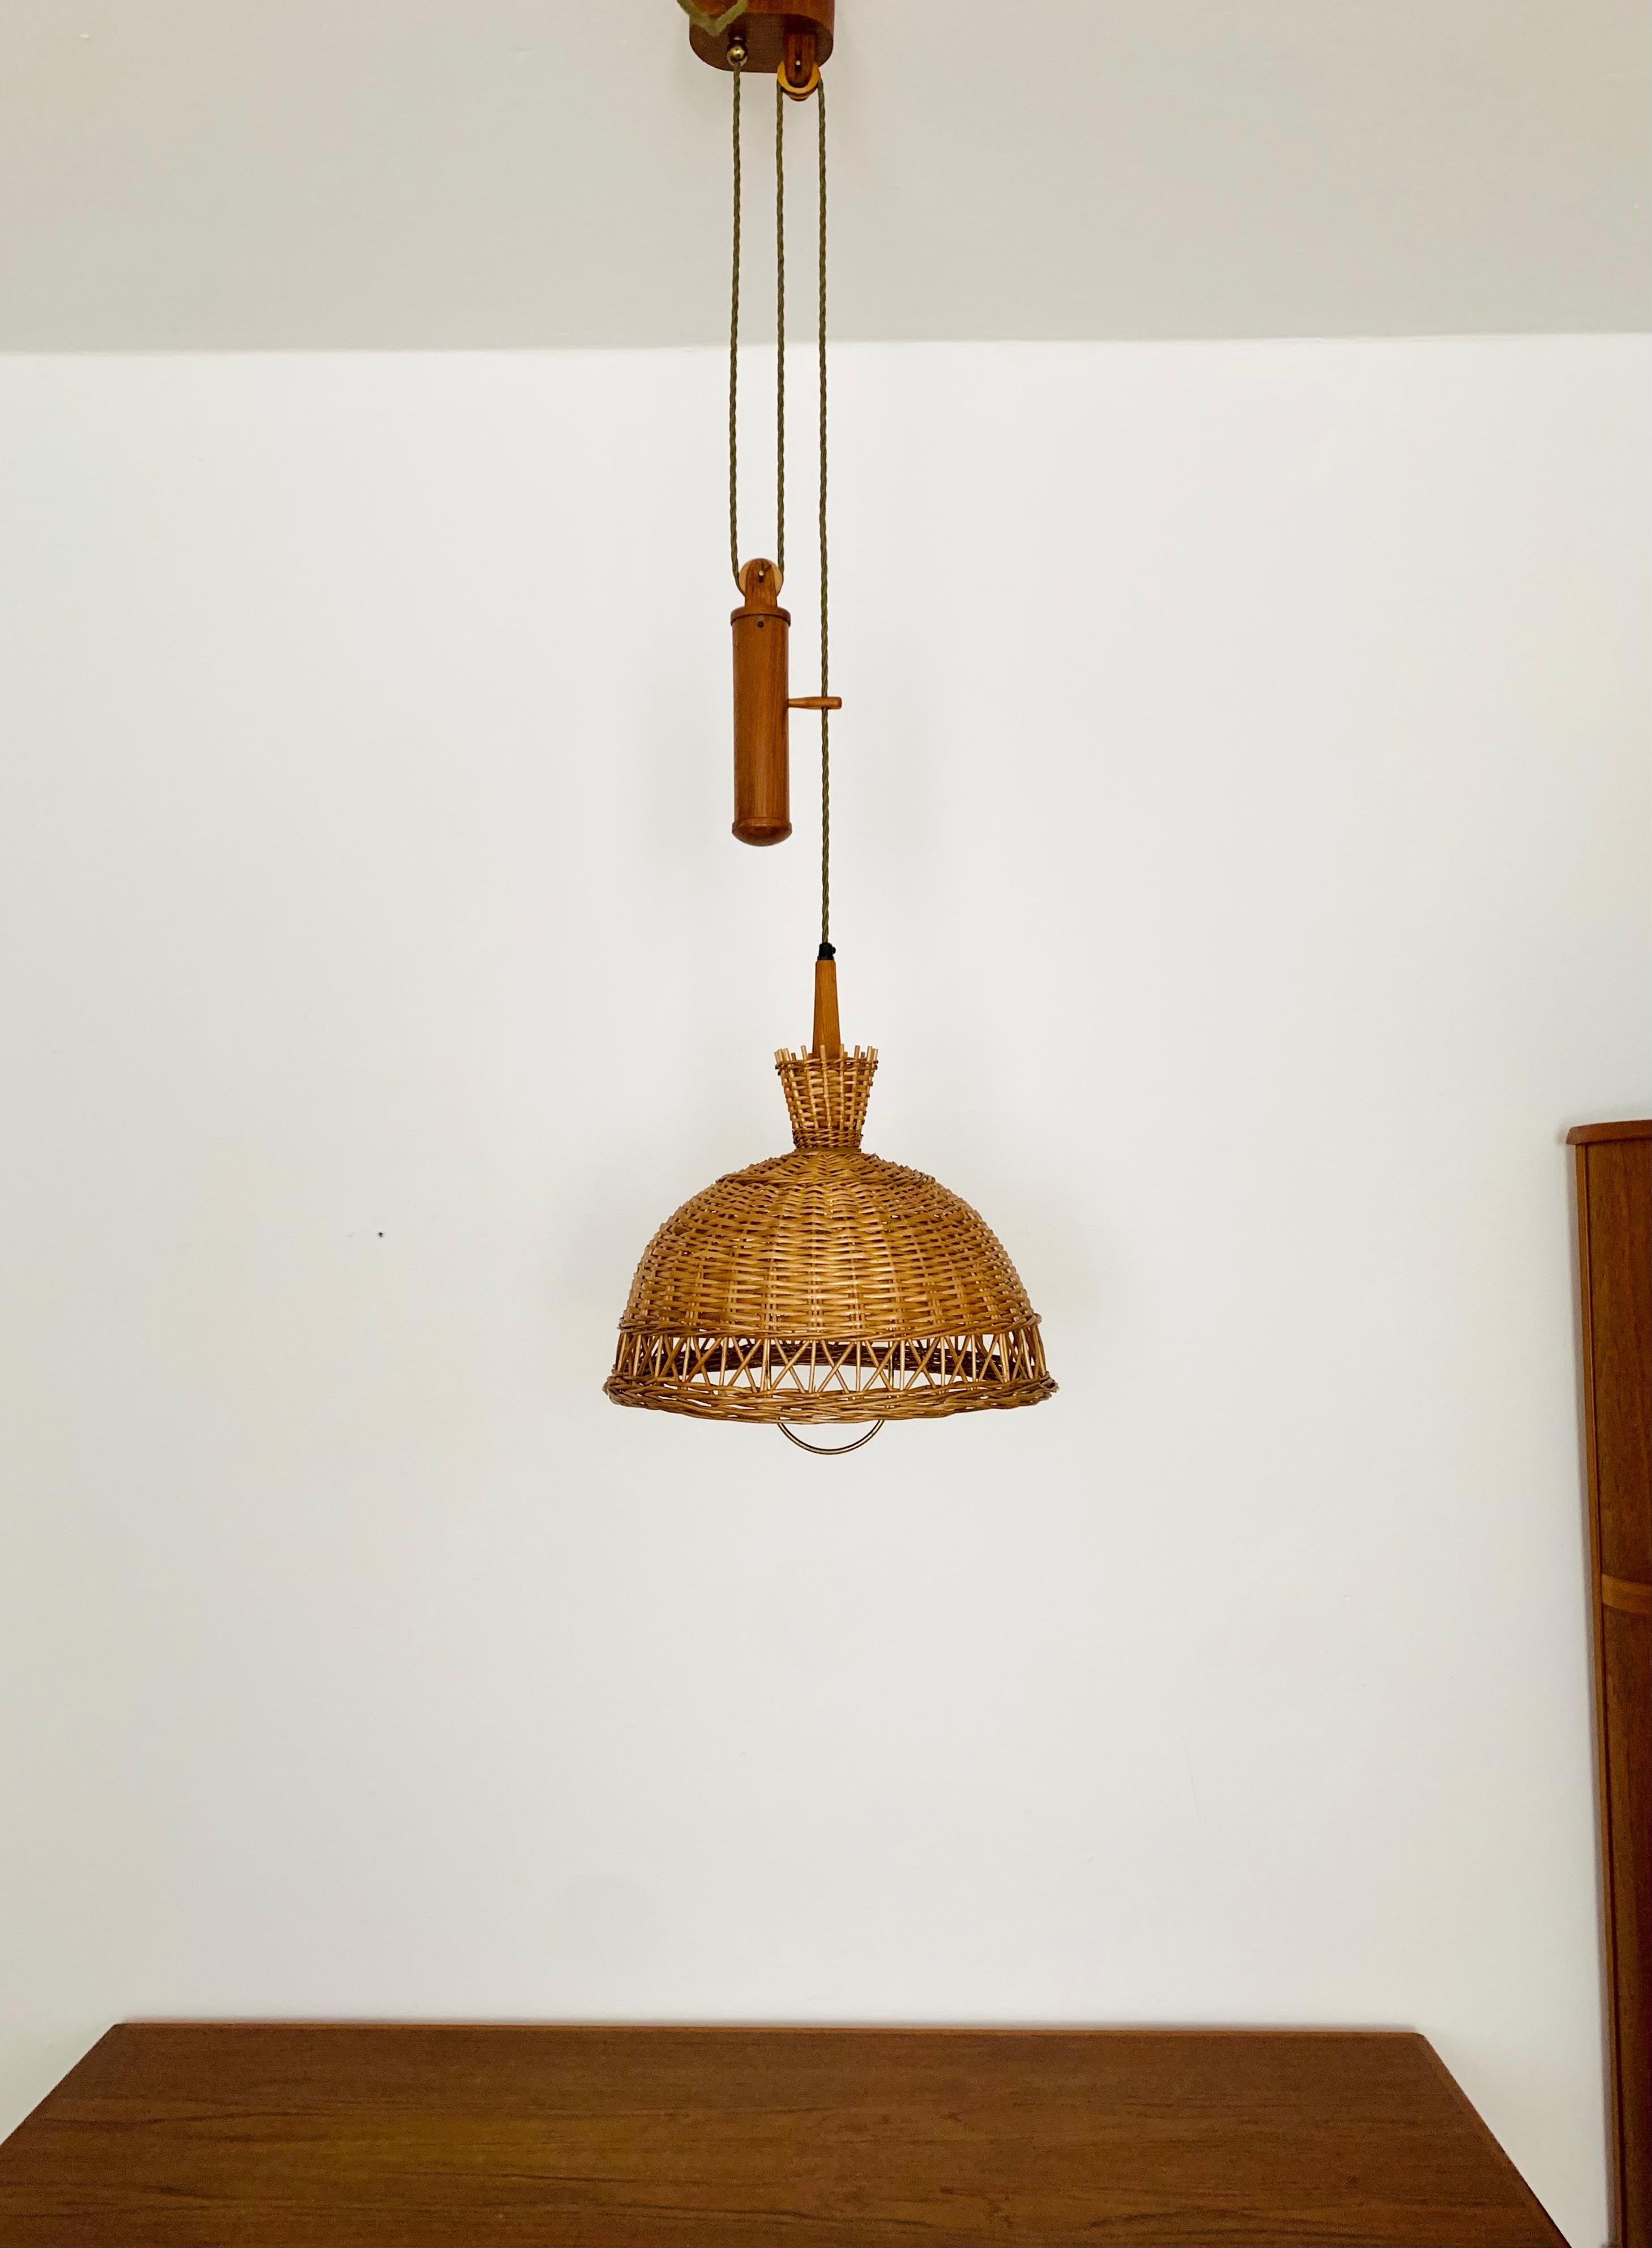 Beautiful height-adjustable lamp from the 1950s.
Great and unusual design with a fantastically comfortable look.
Very nice teak details and high-quality workmanship.
A spectacular play of light is created.

Condition:

Very good vintage condition